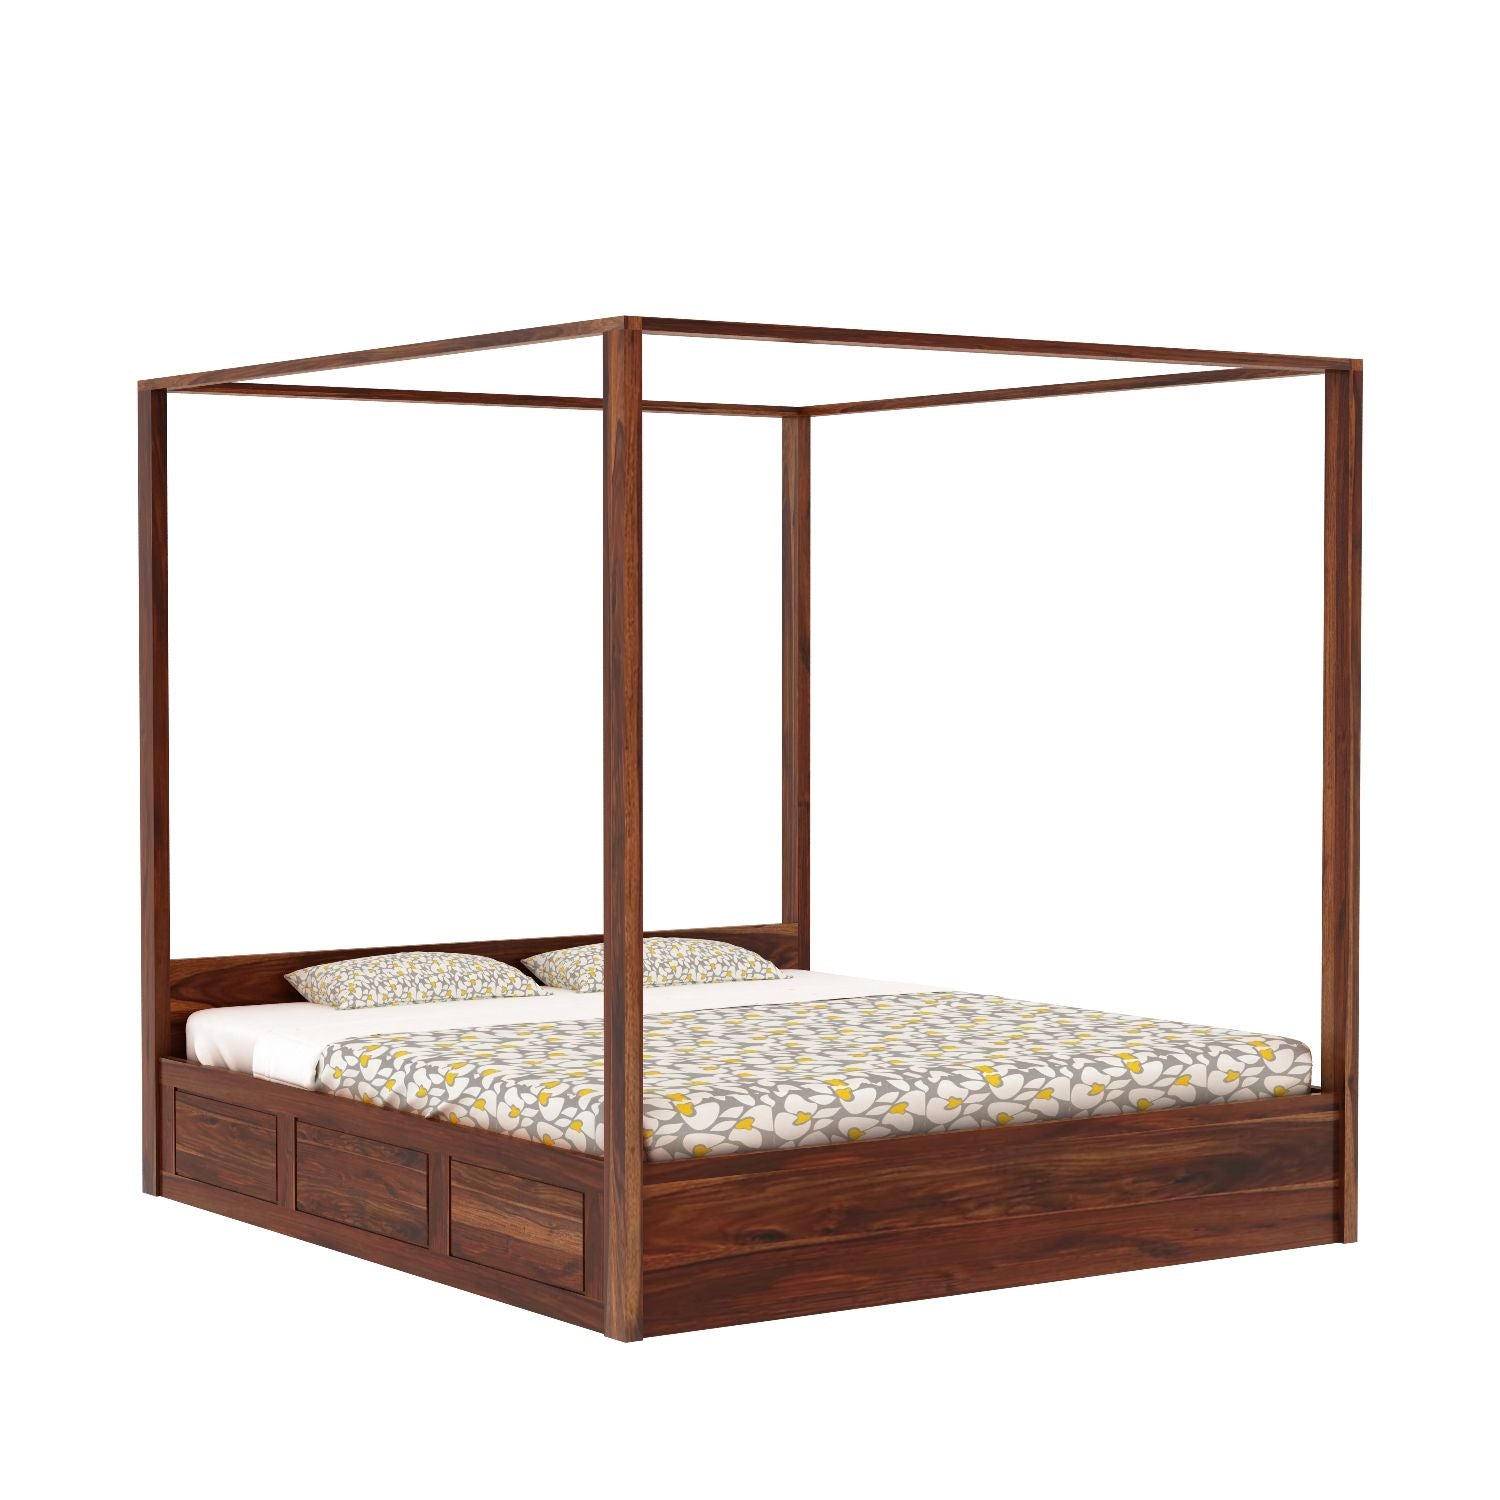 Solivo Solid Sheesham Wood Hydraulic Poster Bed With Box Storage (Queen Size, Natural Finish)